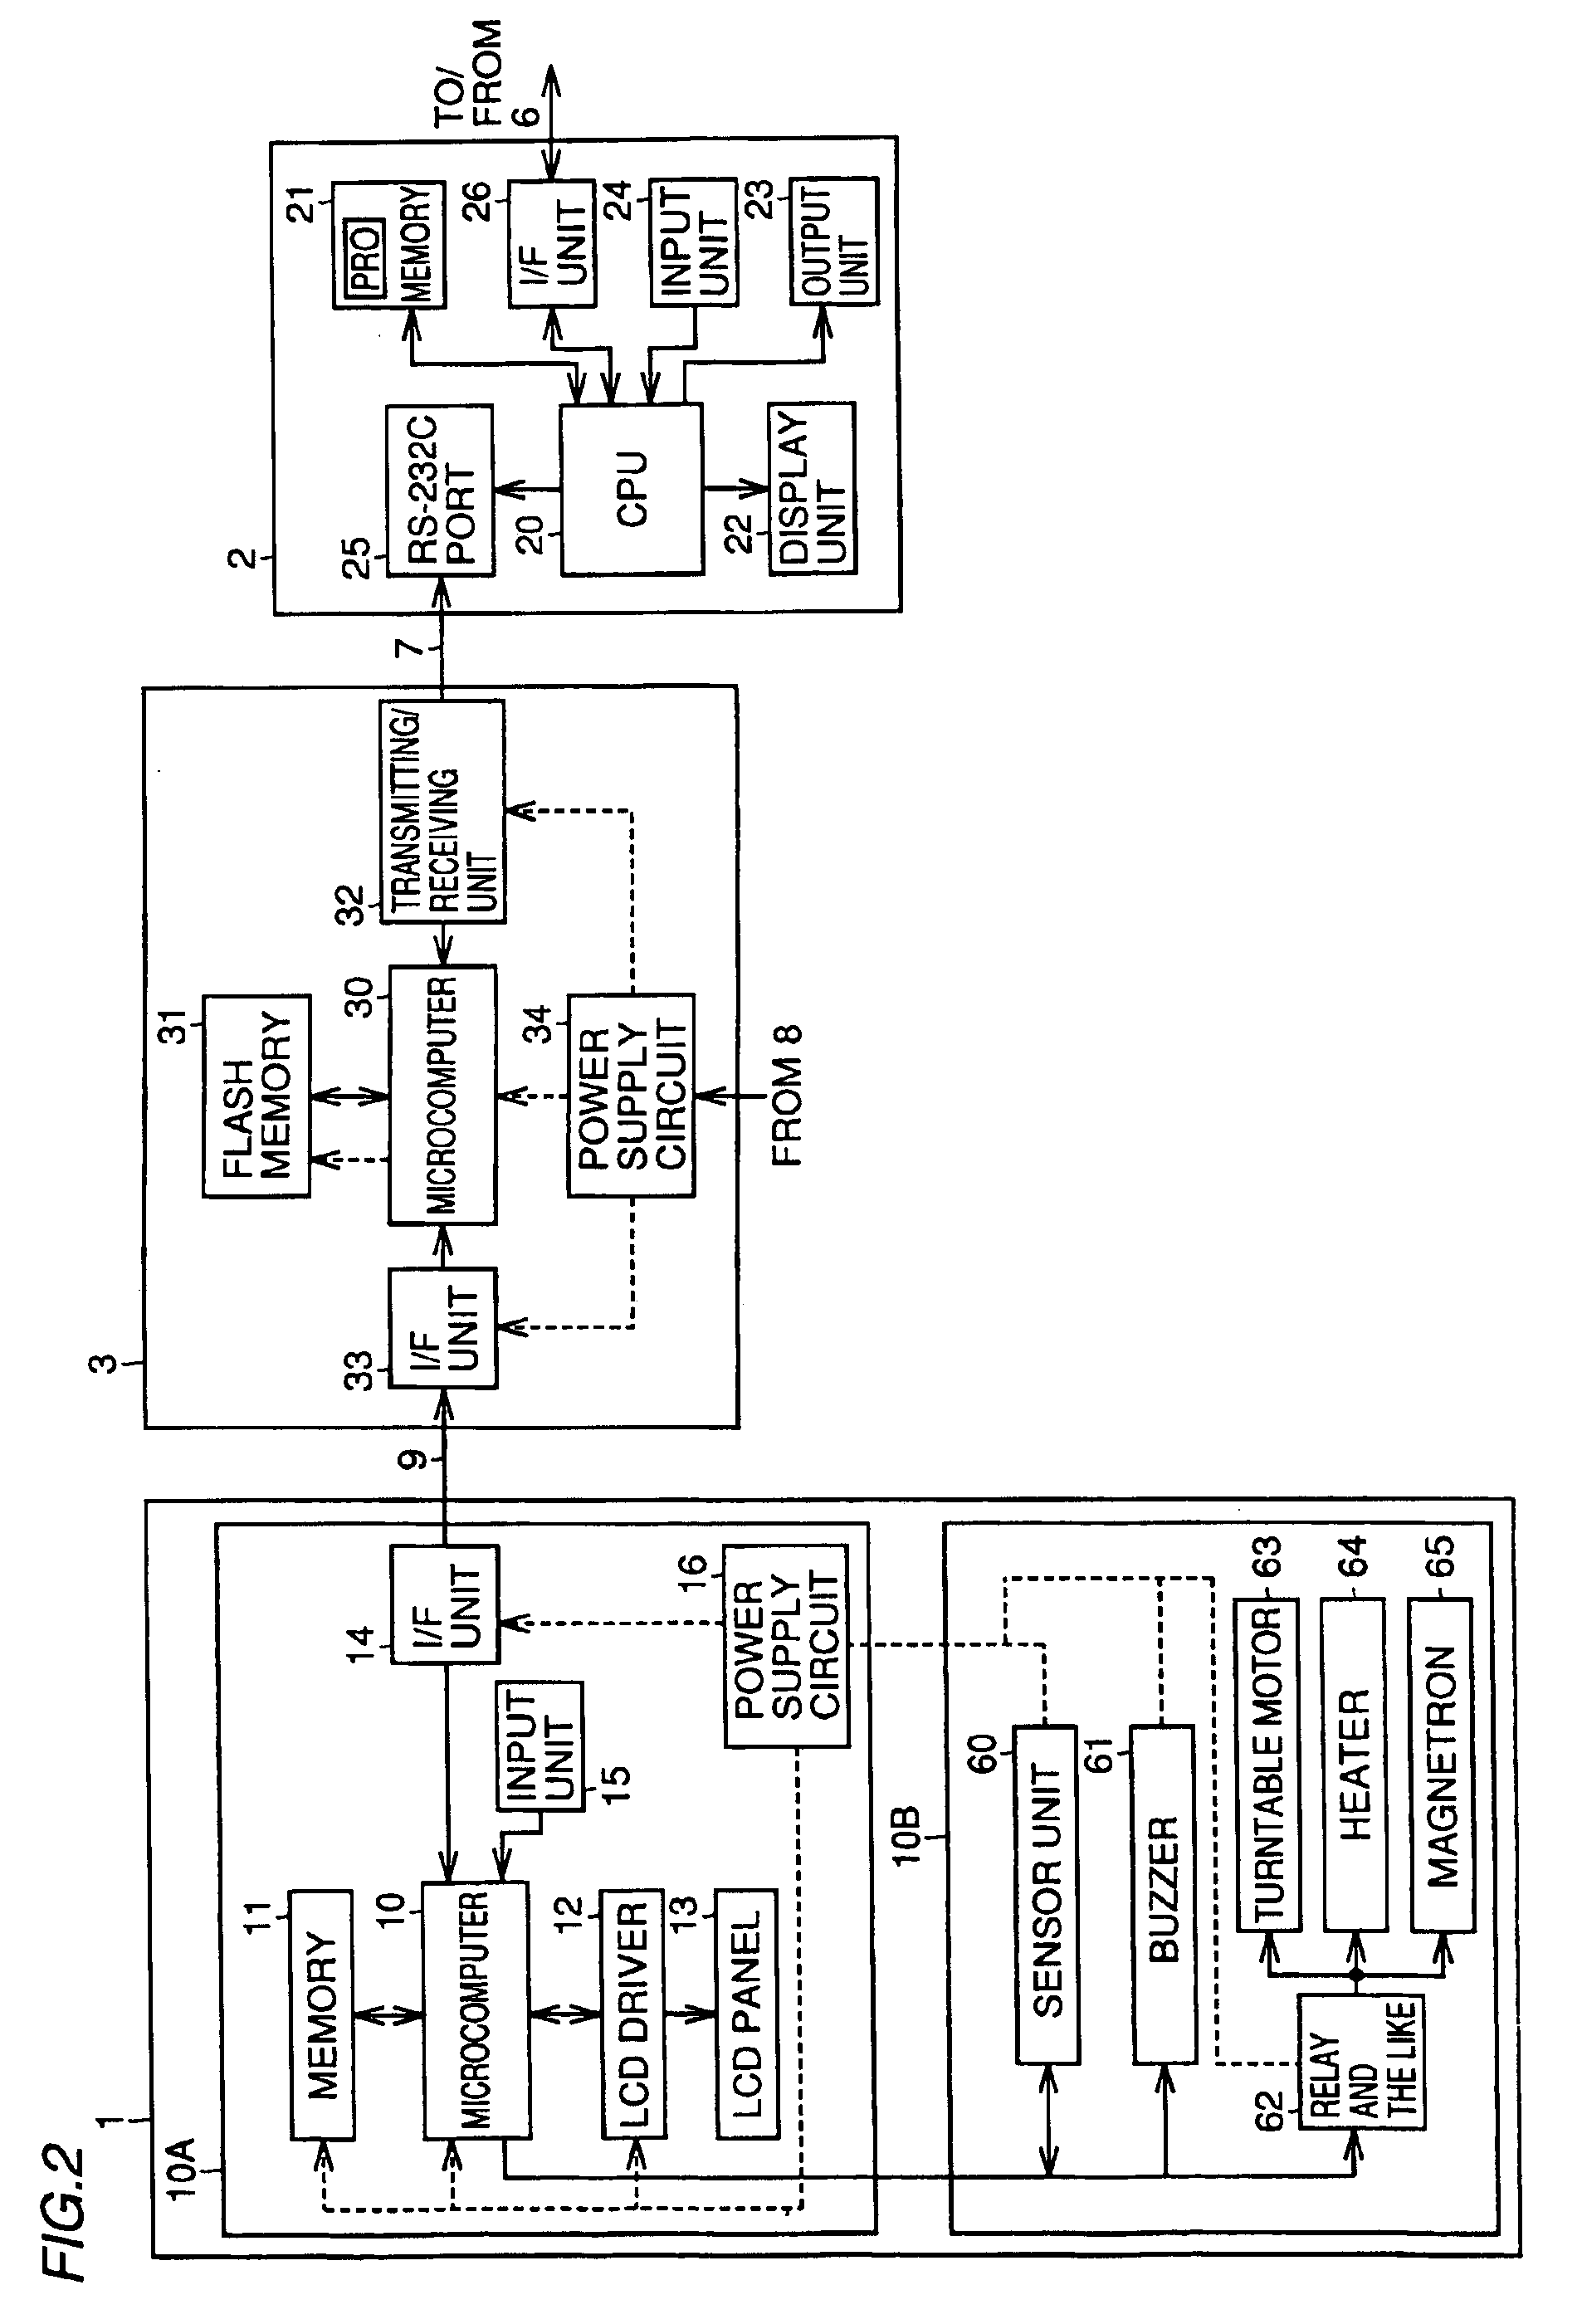 Methods and apparatus for controlling operation of a microwave oven in a network